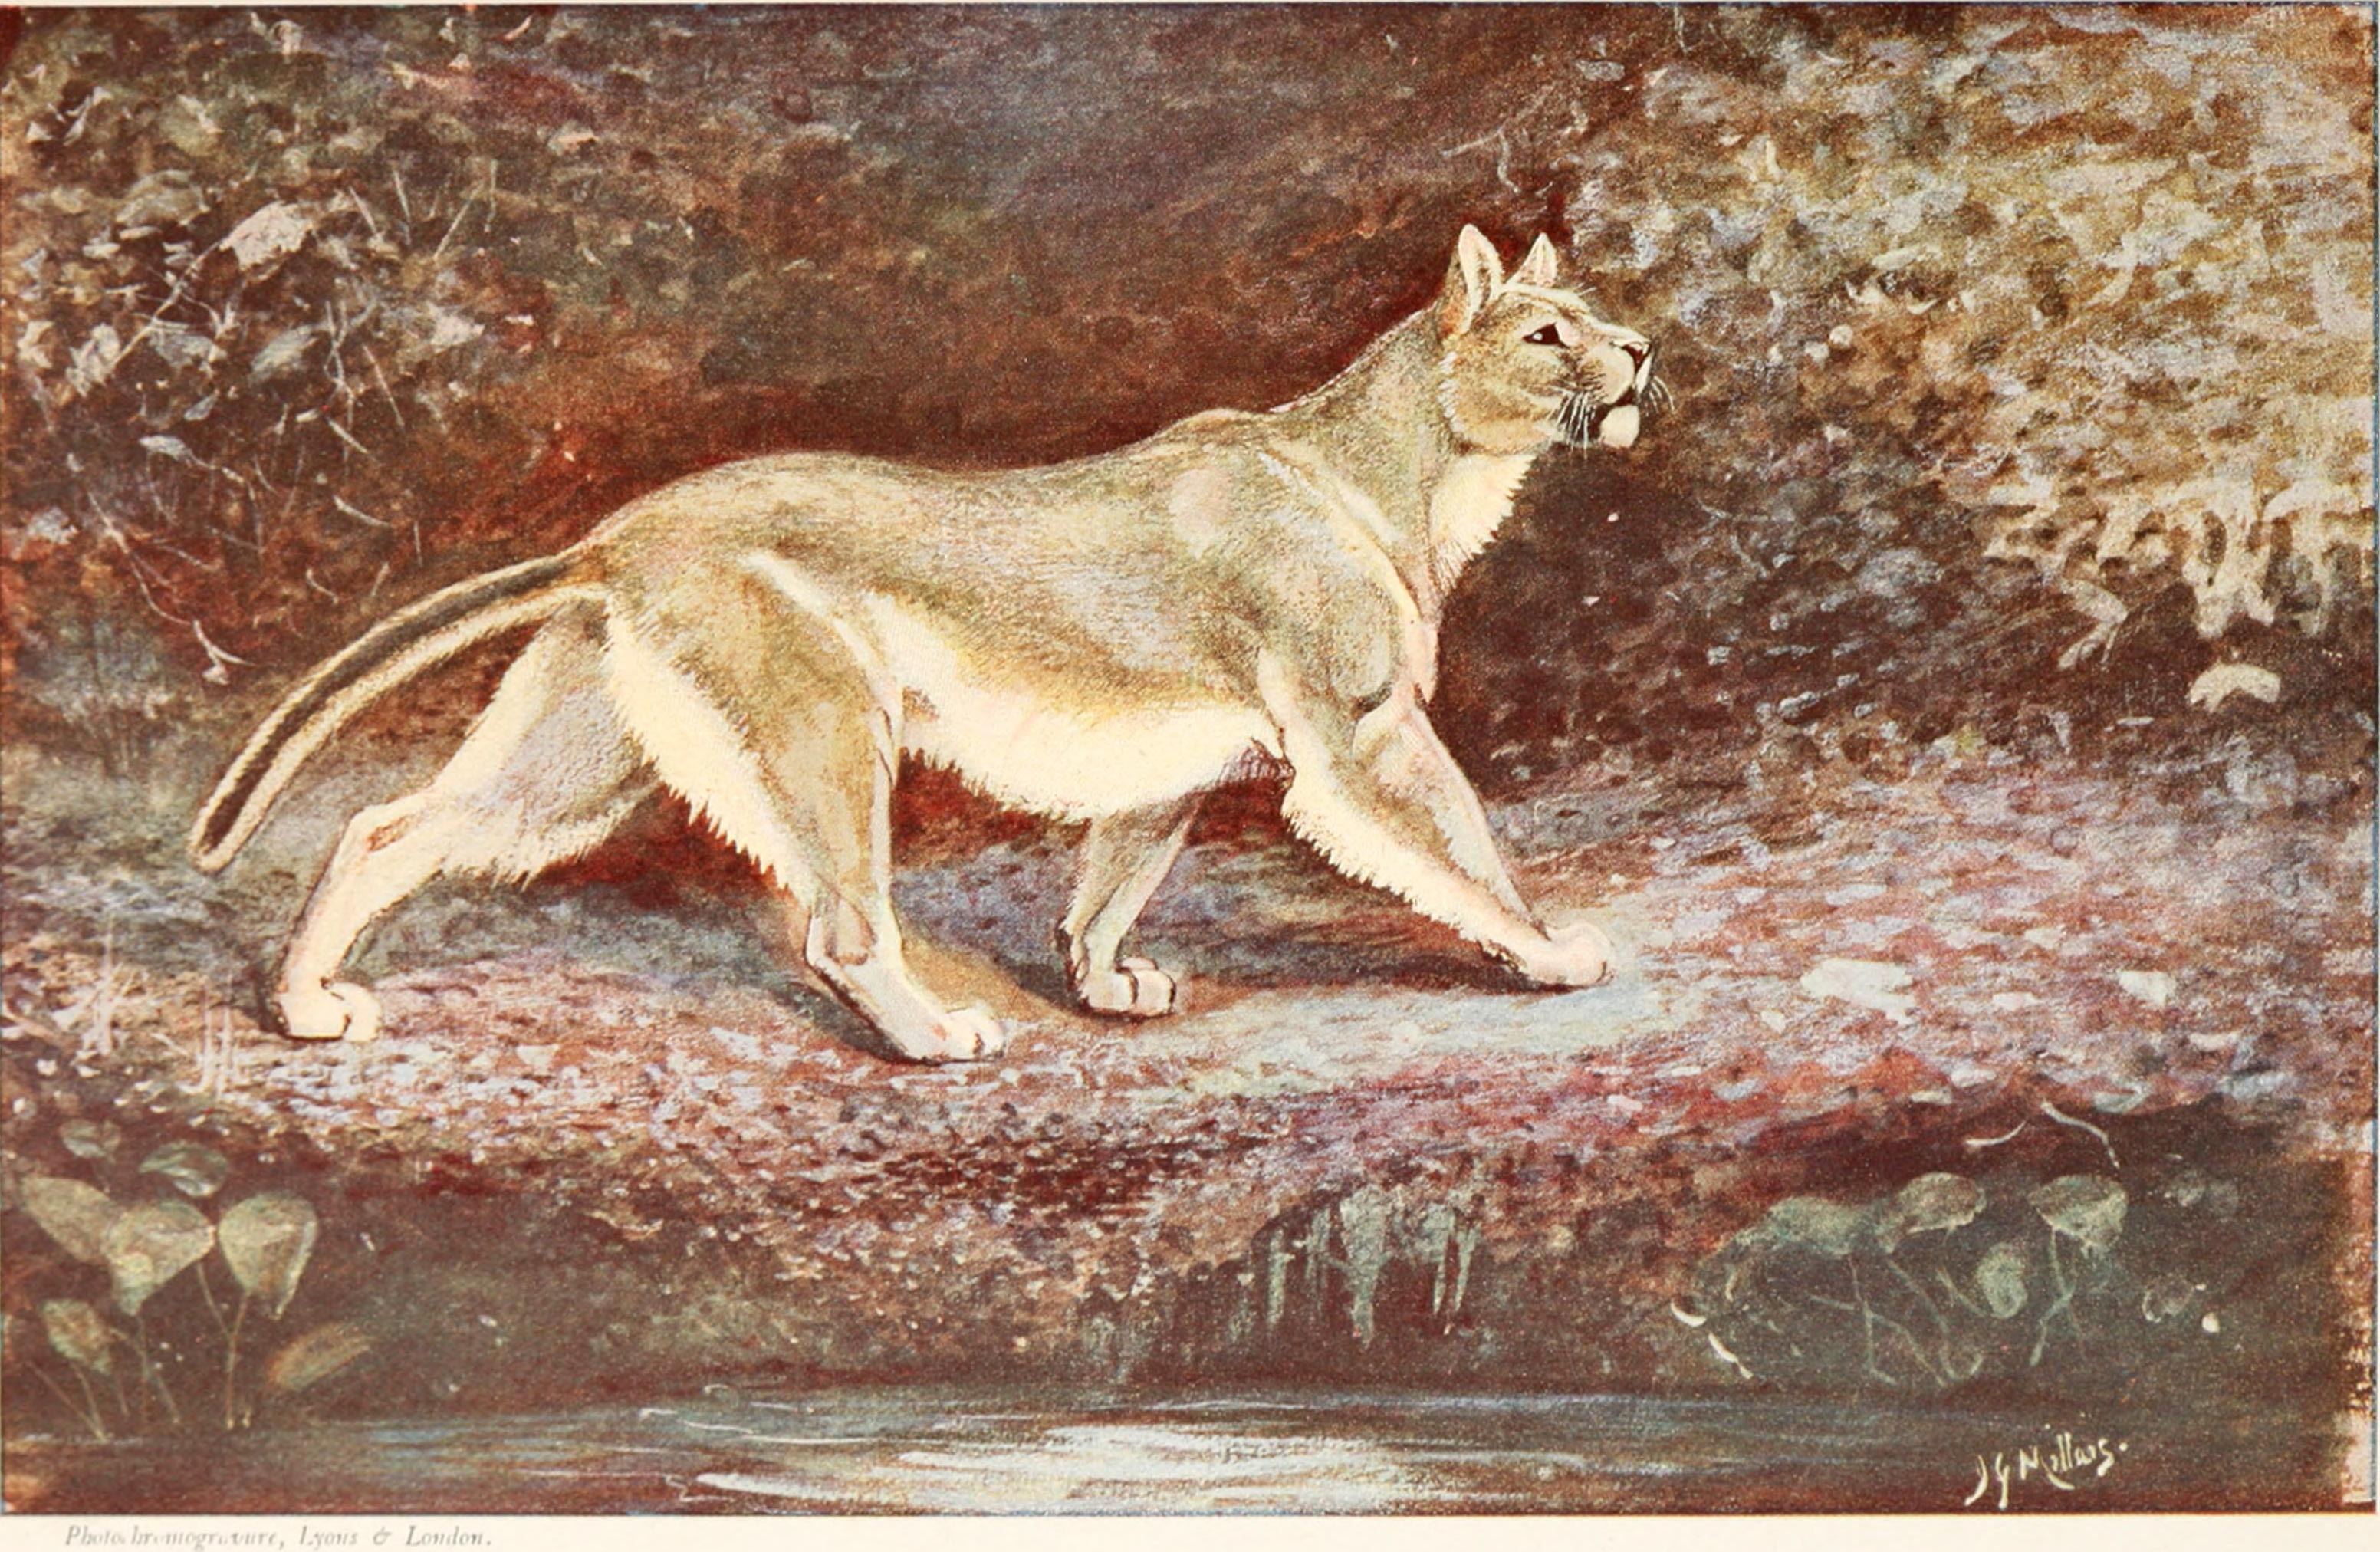 cougar (Puma concolor); Image ONLY